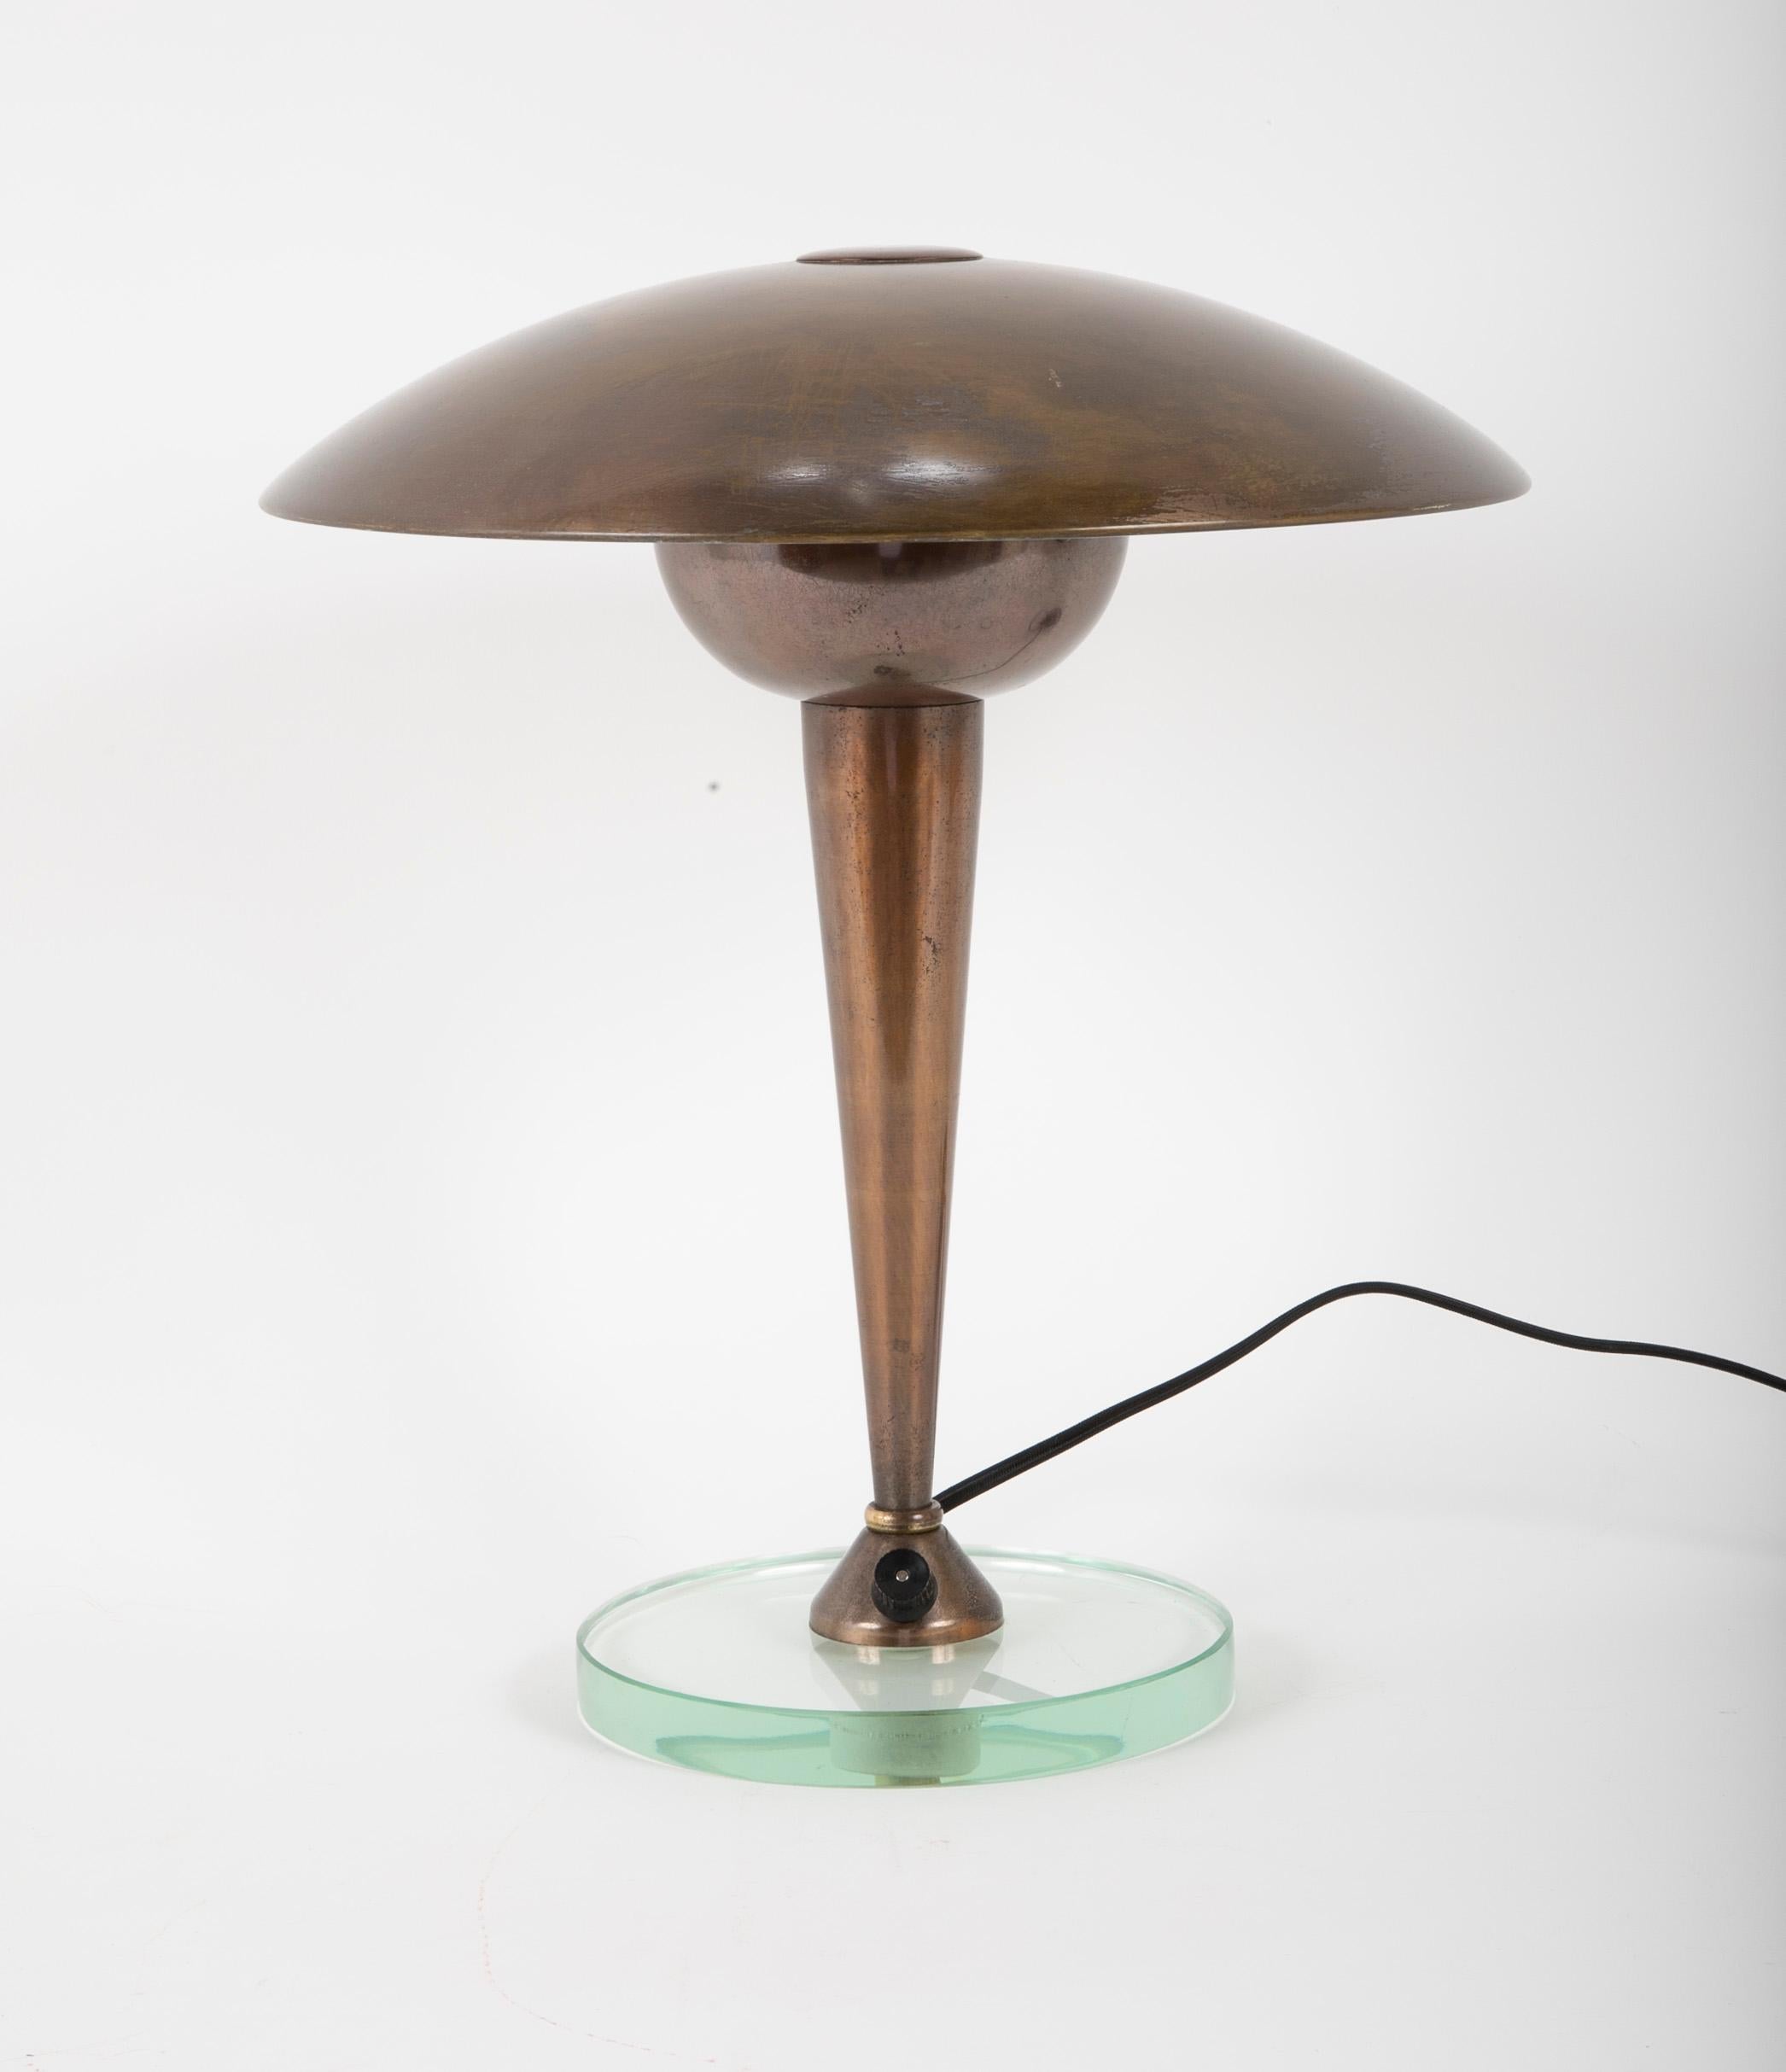 A lamp produced by Stilnovo, brass shade on a conical brass central shaft rising from a round piece of 3/4